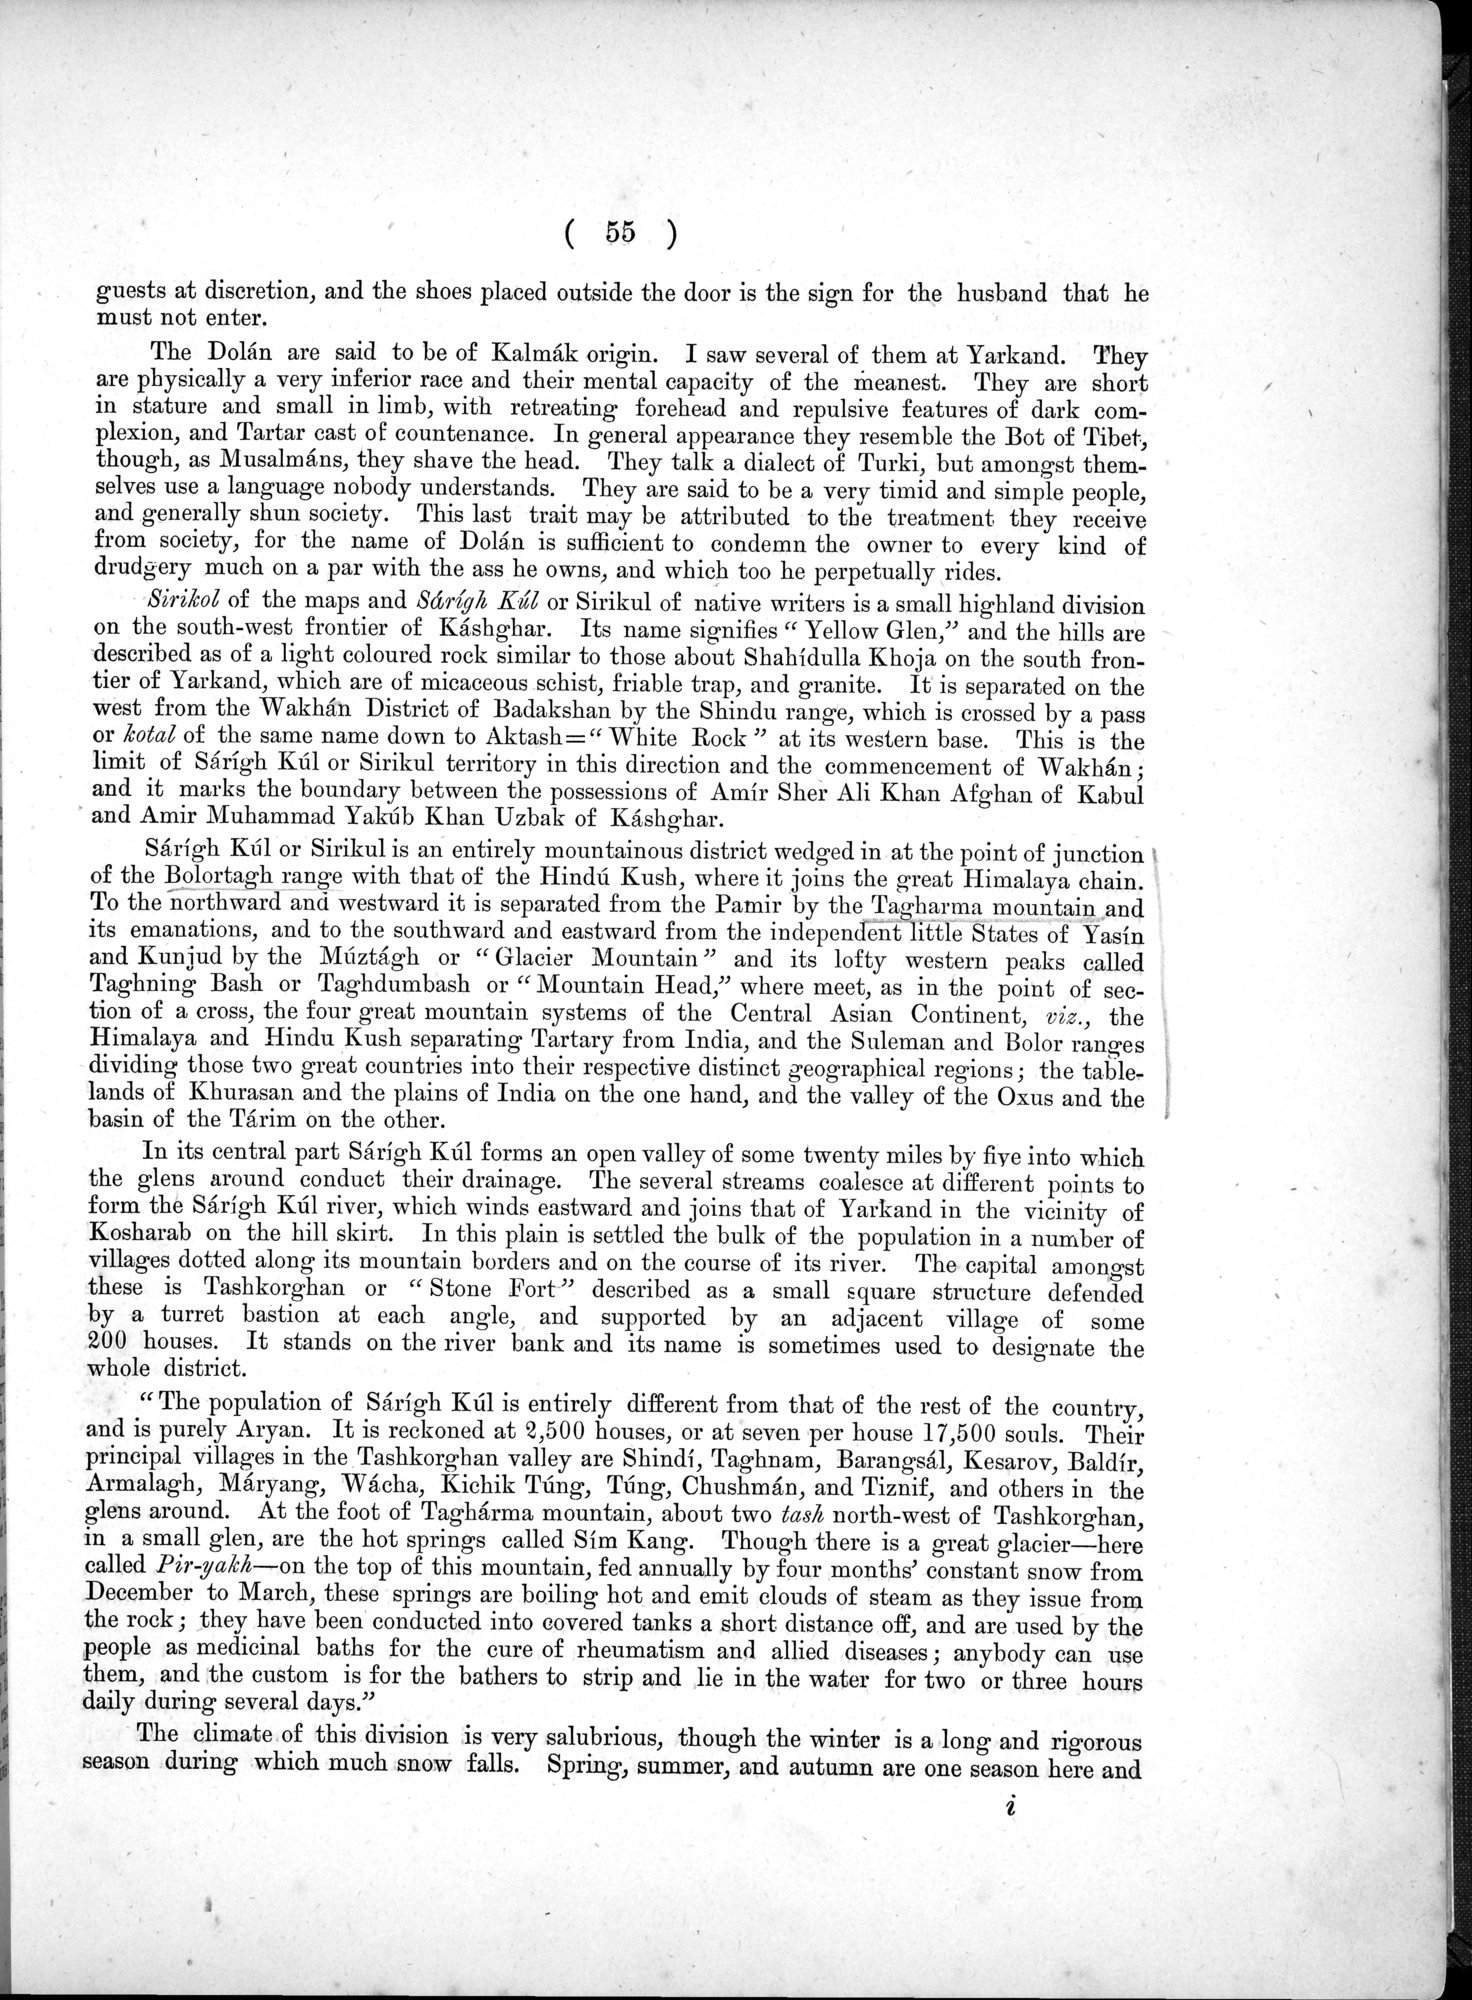 Report of a Mission to Yarkund in 1873 : vol.1 / Page 95 (Grayscale High Resolution Image)